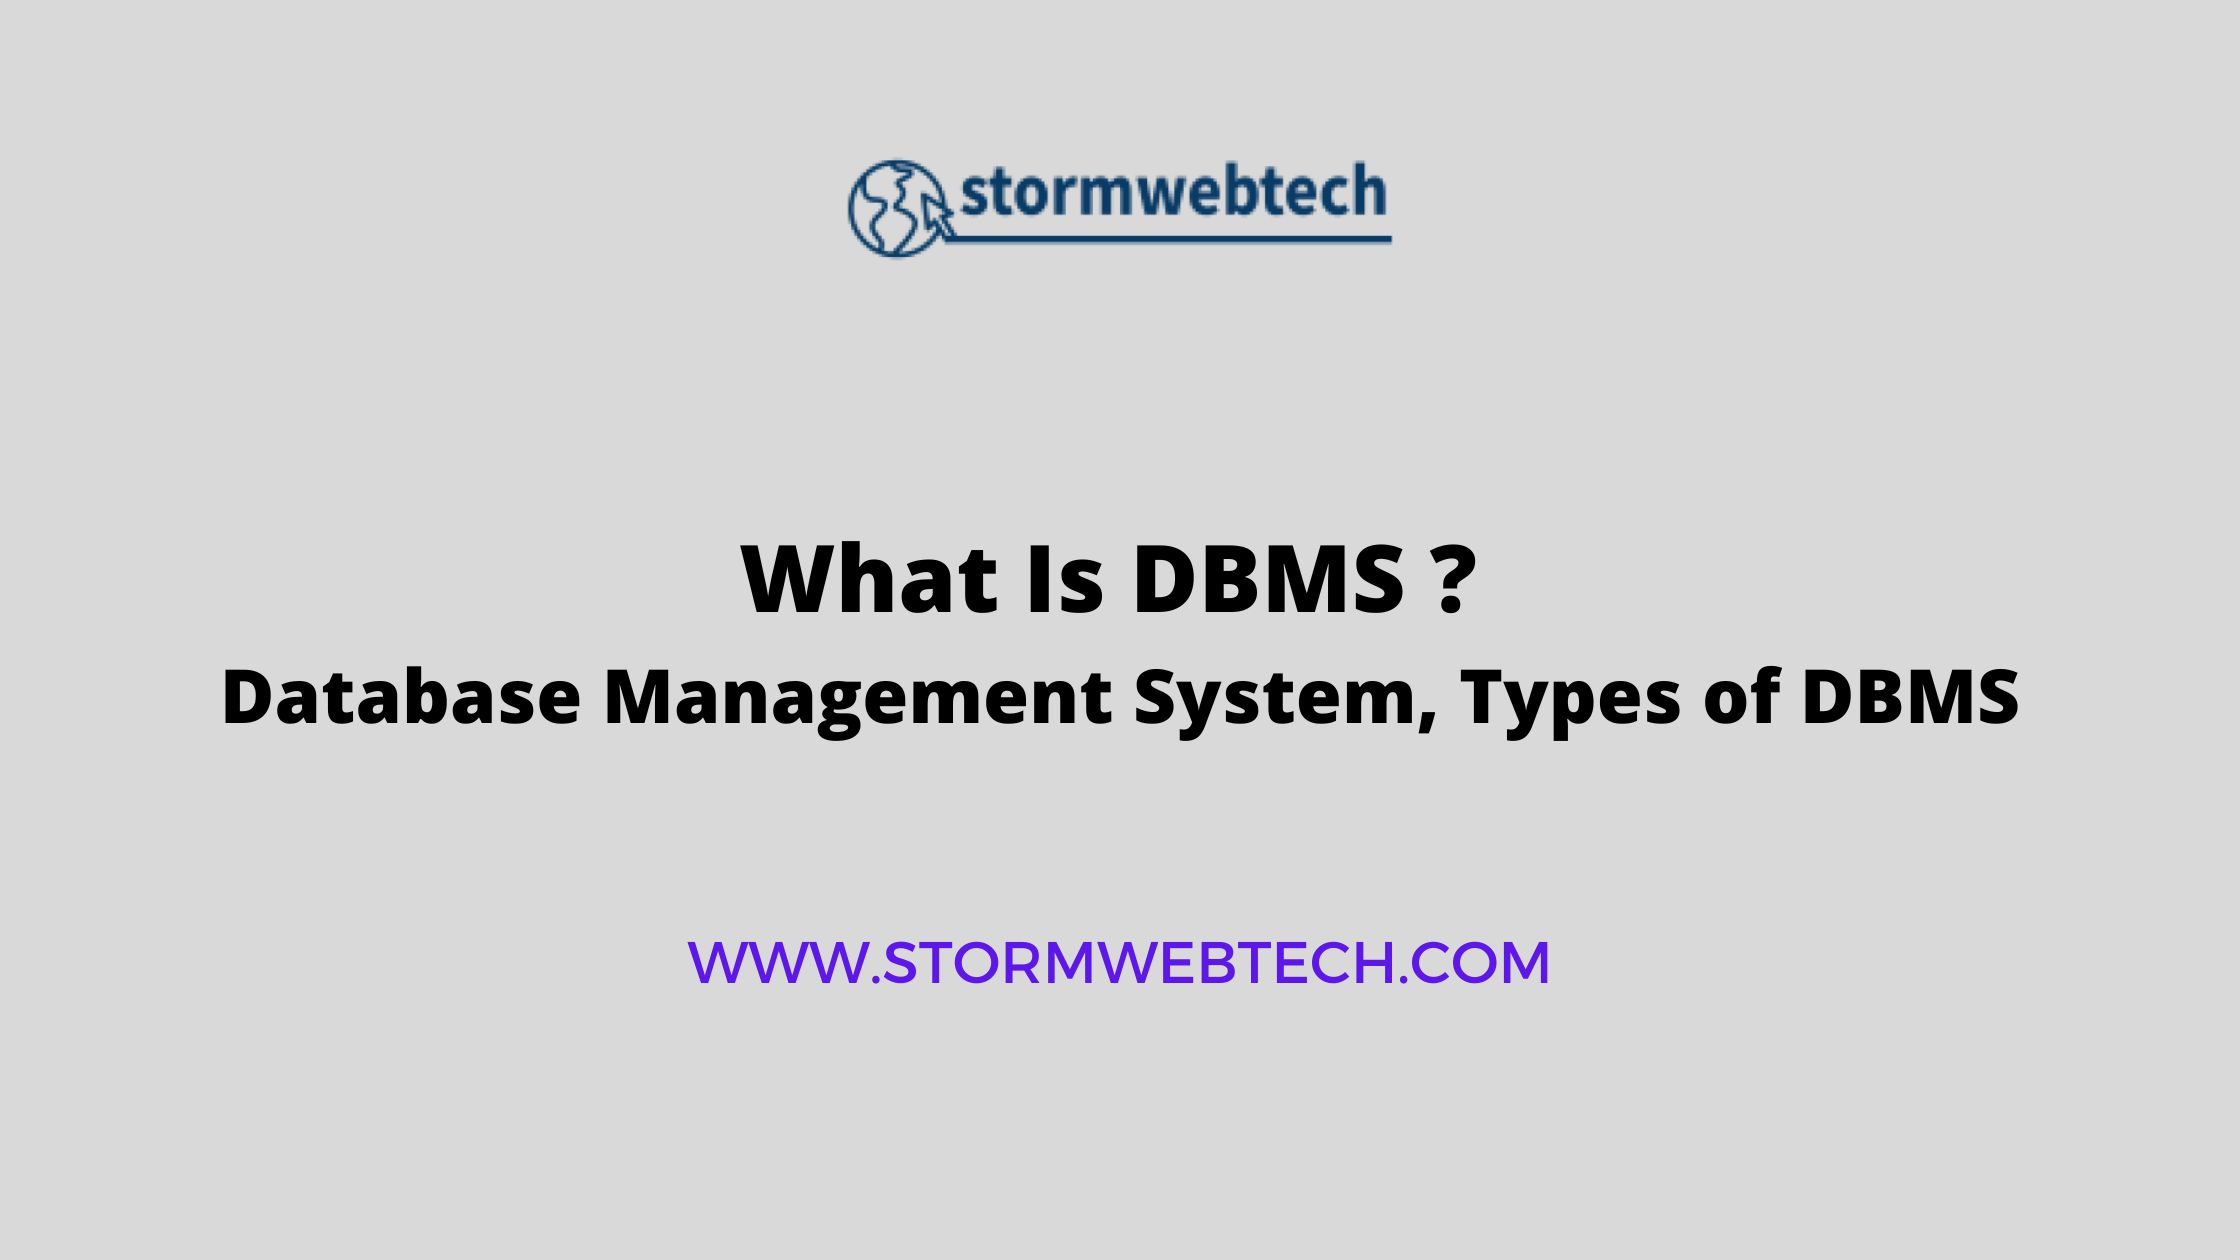 What Is DBMS, What Is Database Management System, Advantages of DBMS, Core Components of DBMS, Types of DBMS